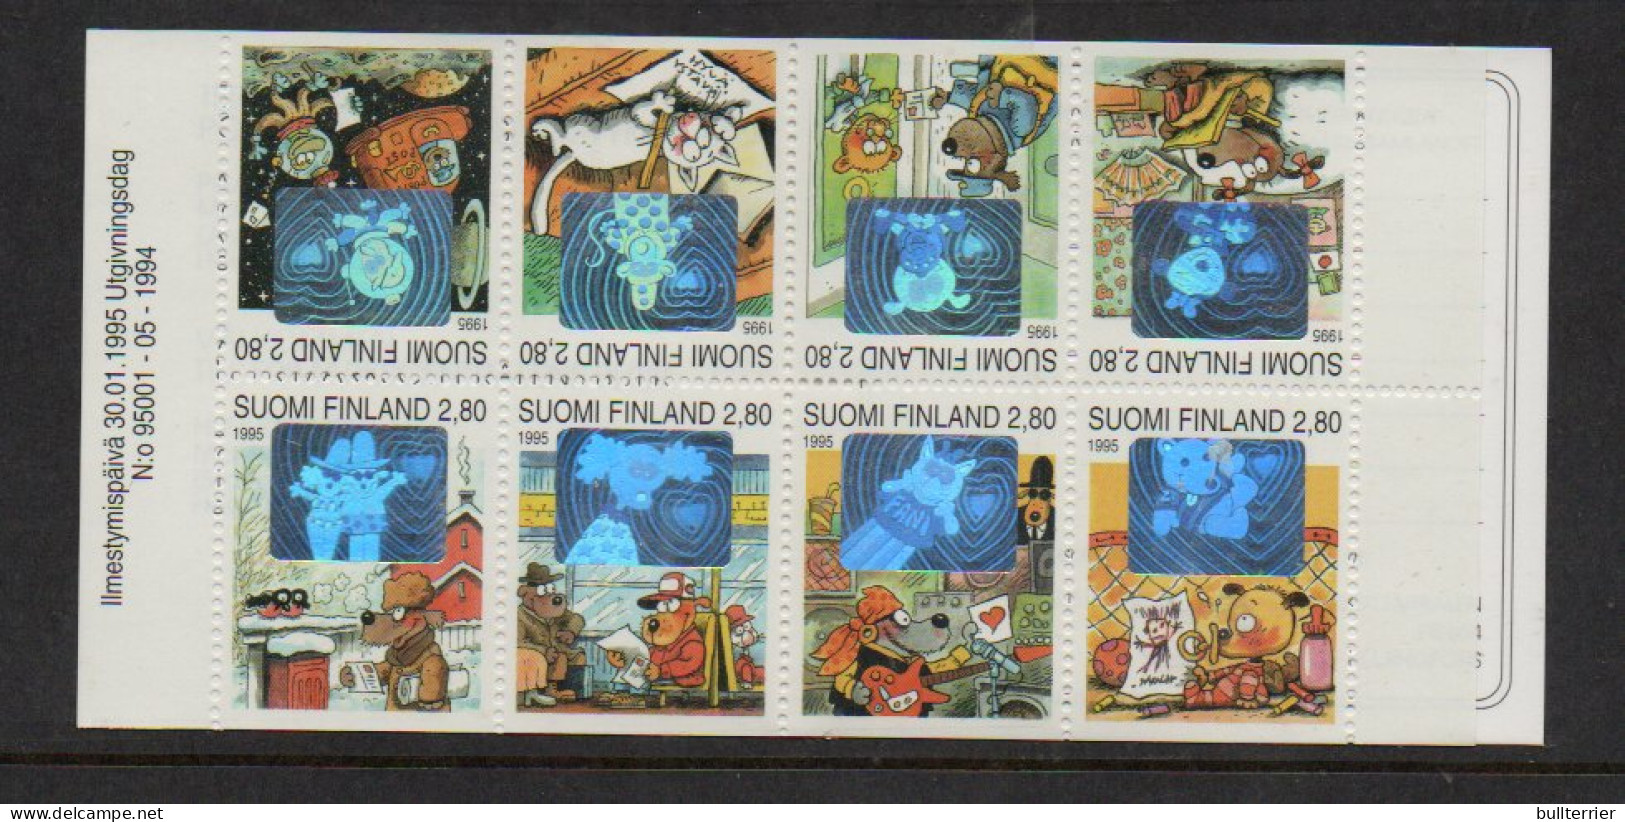 FINLAND - 1995 GREETINGS HOLOGRAM STAMPS BOOKLET COMPLET  MINT NEVER HINGED  SG CAT £20 - Nuevos